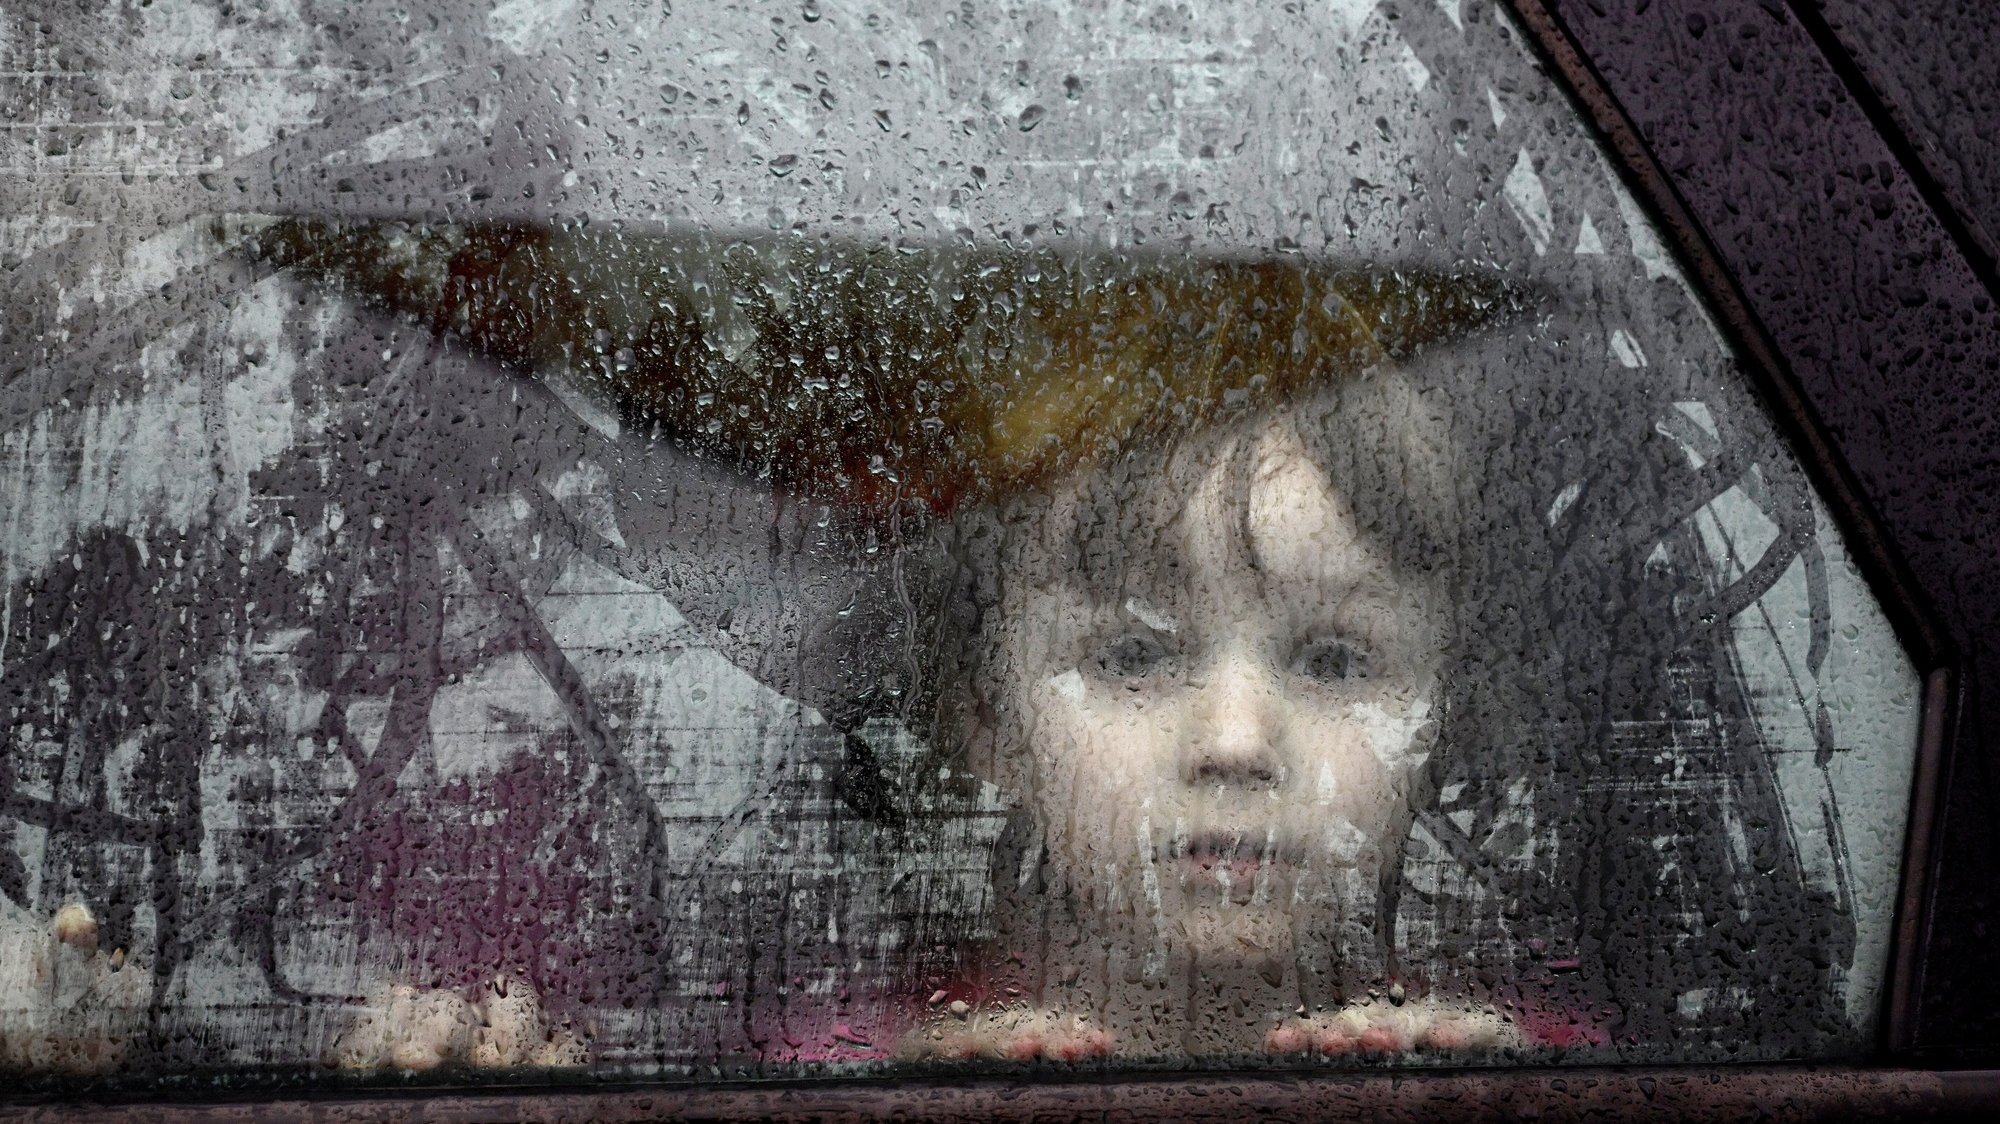 epa09880407 A refugee child from Ukraine upon arrival at the Humanitarian Aid Center in Przemysl, Poland 09 April 2022. Today marks 45 days of Russian aggression against Ukraine.  EPA/Darek Delmanowicz POLAND OUT